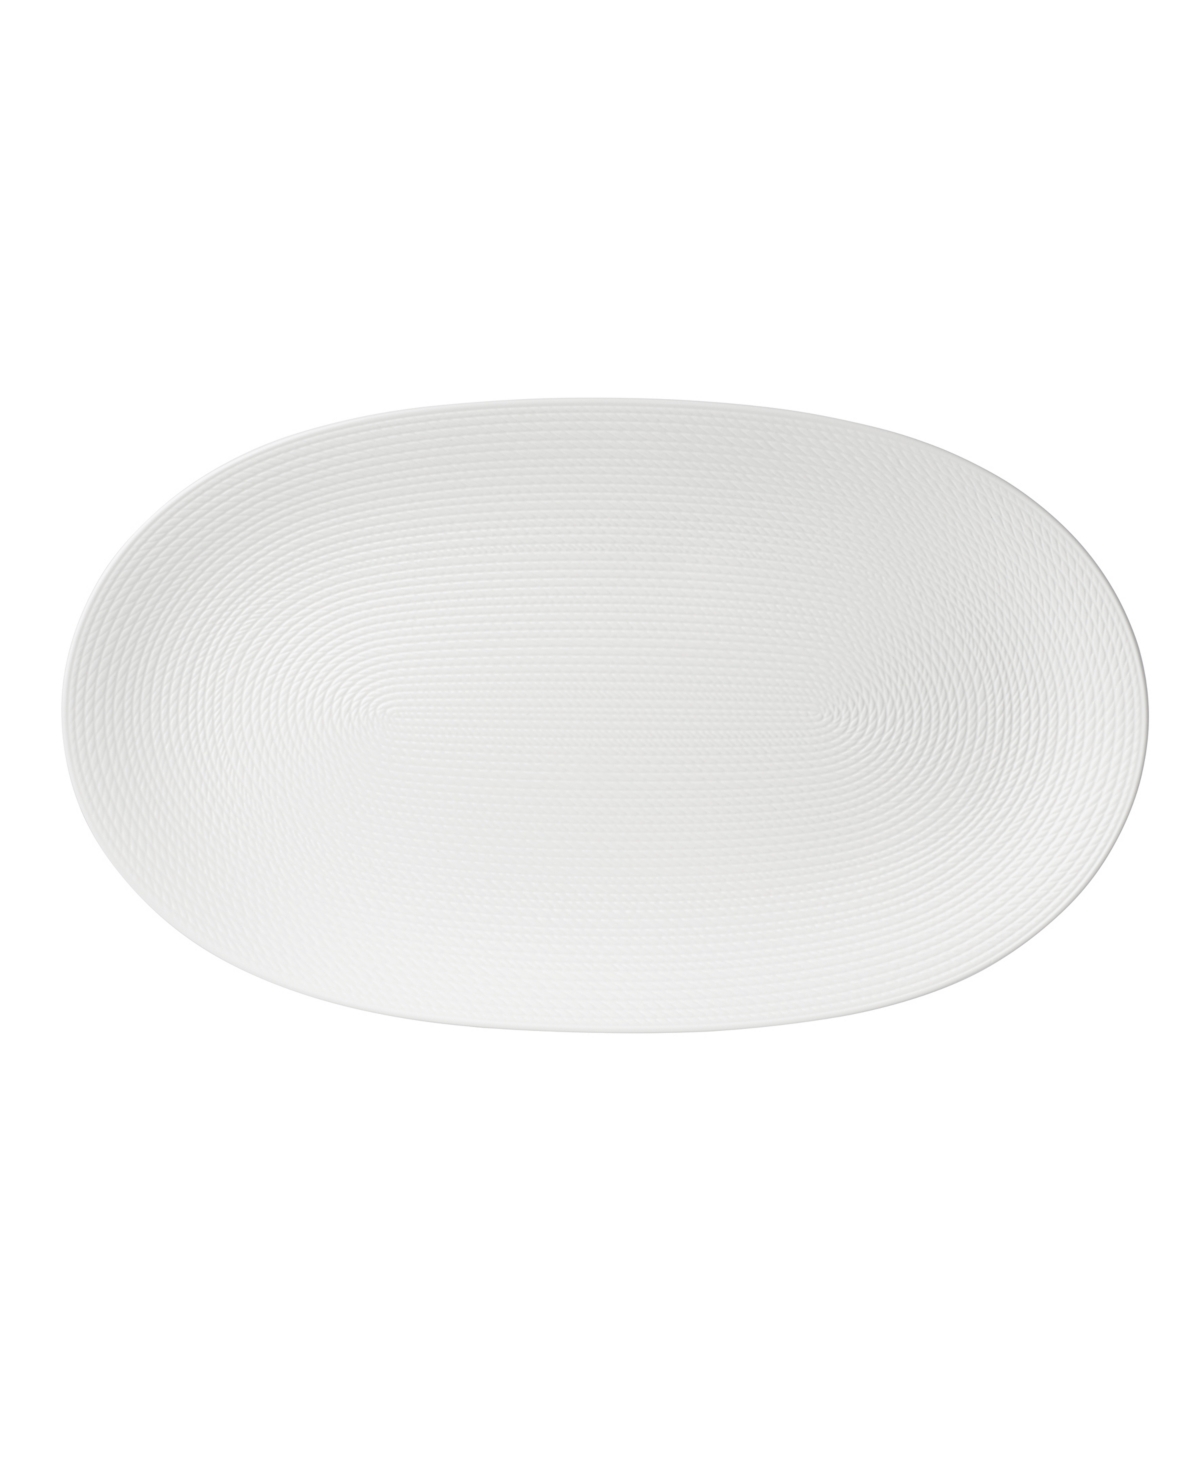 Lenox Lx Collective Oval Tray In White